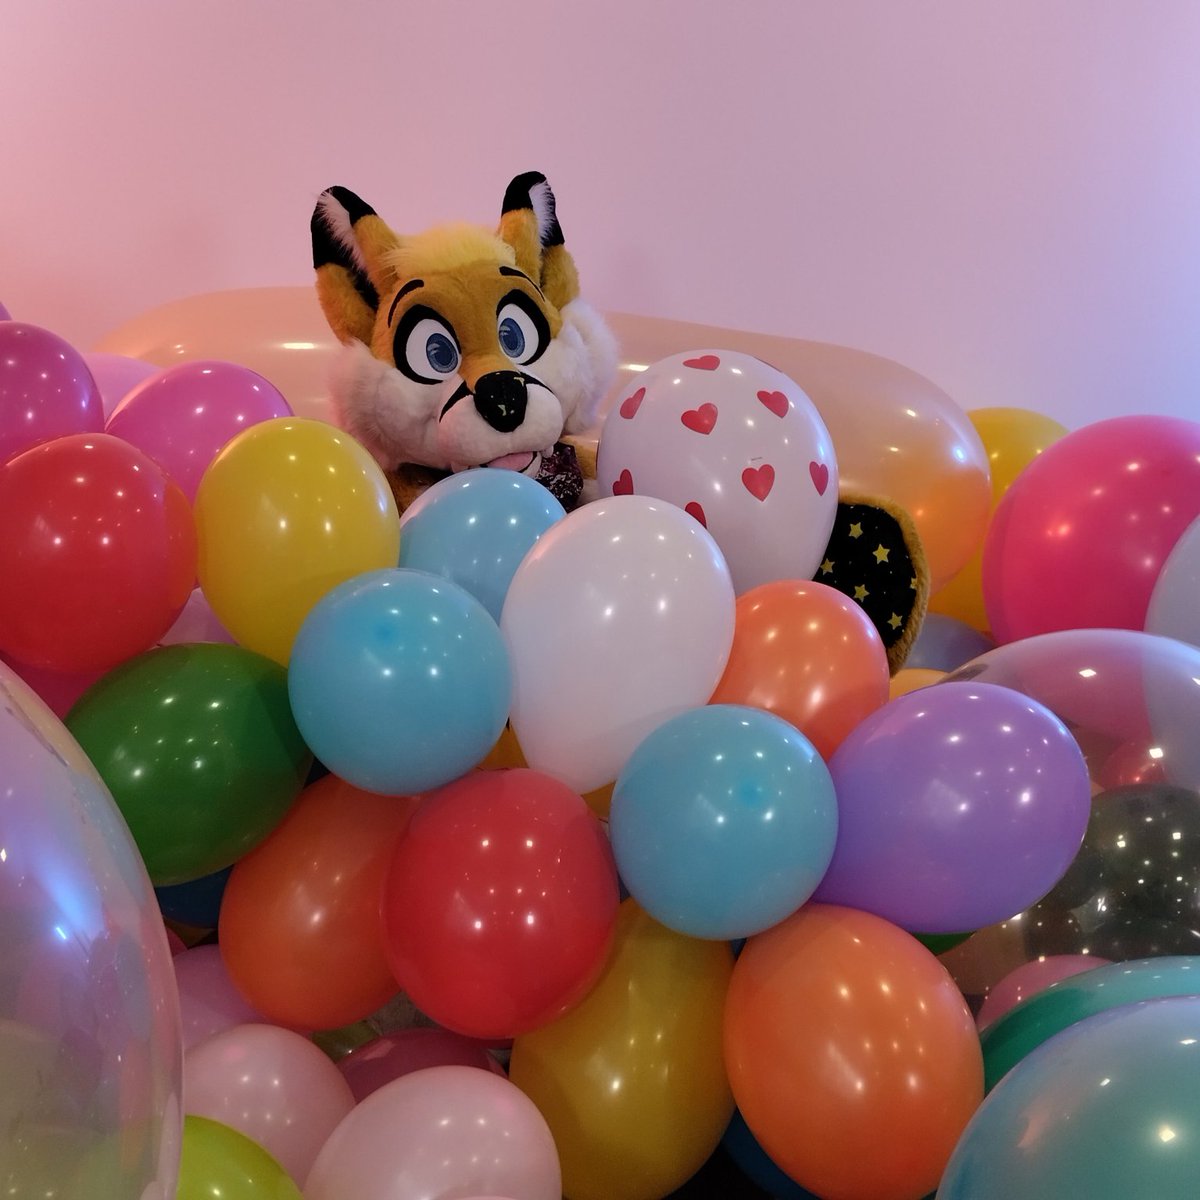 What is it with all these balloons on my timeline today?! It's almost like today is my birthday or something? Didn't we celebrate this last year?

#34YearsAndCounting #FursuitAnyDay #Furry #Fursuiter